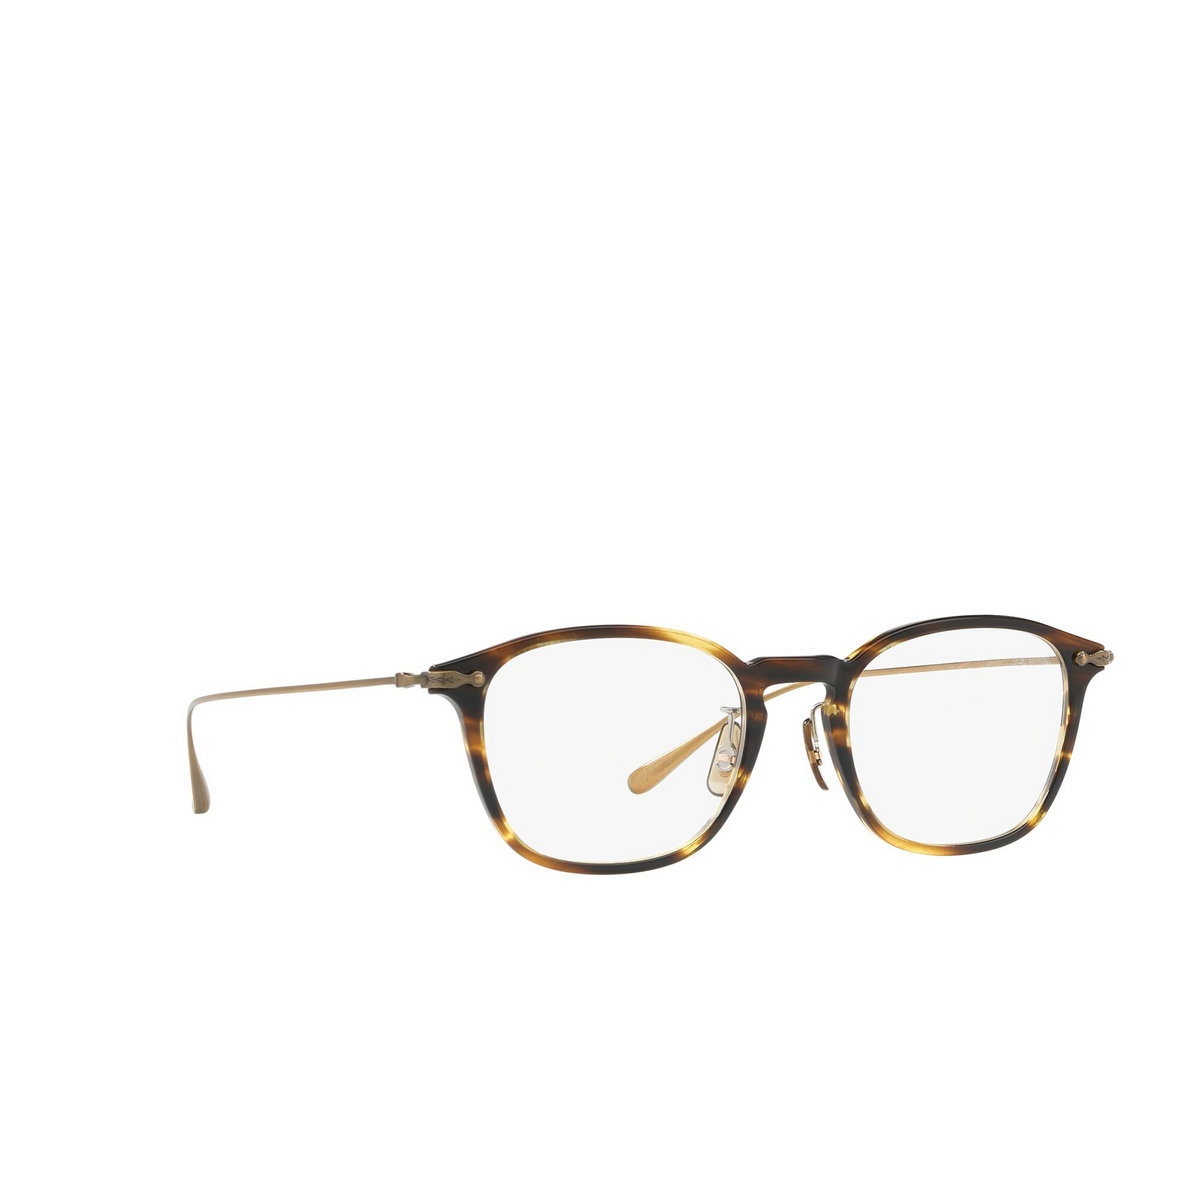 Oliver Peoples® Rectangle Eyeglasses: Winnet OV5371D color Cocobolo 1003 - three-quarters view.